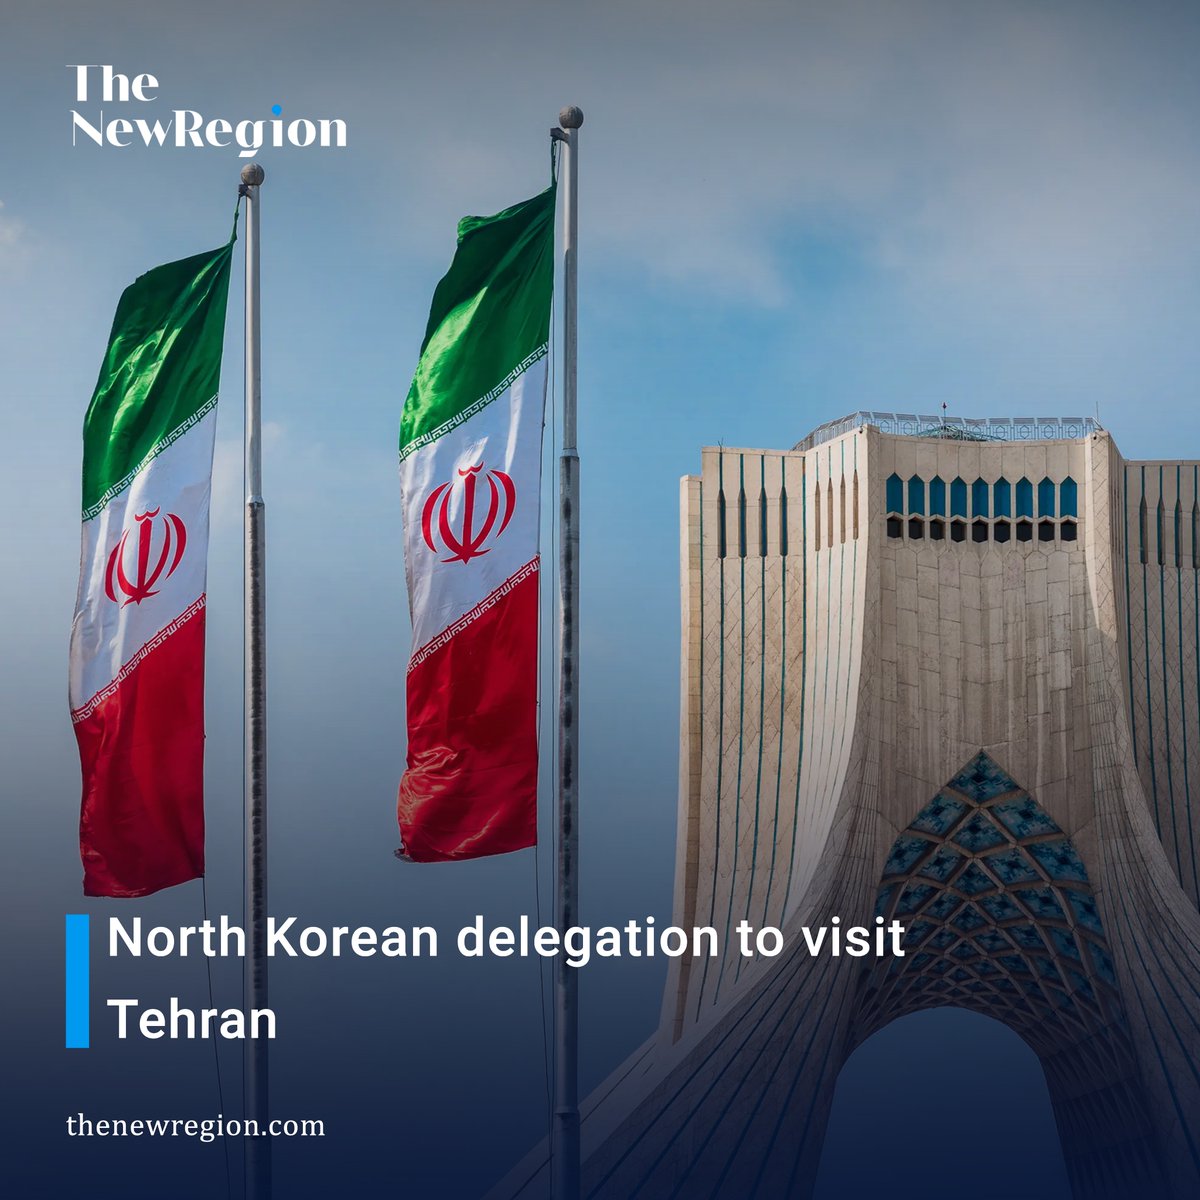 A #North_Korean delegation led by the cabinet minister for international trade is visiting #Iran, believed to have secret military ties, Reuters reported on wednesday

#TheNewRegion